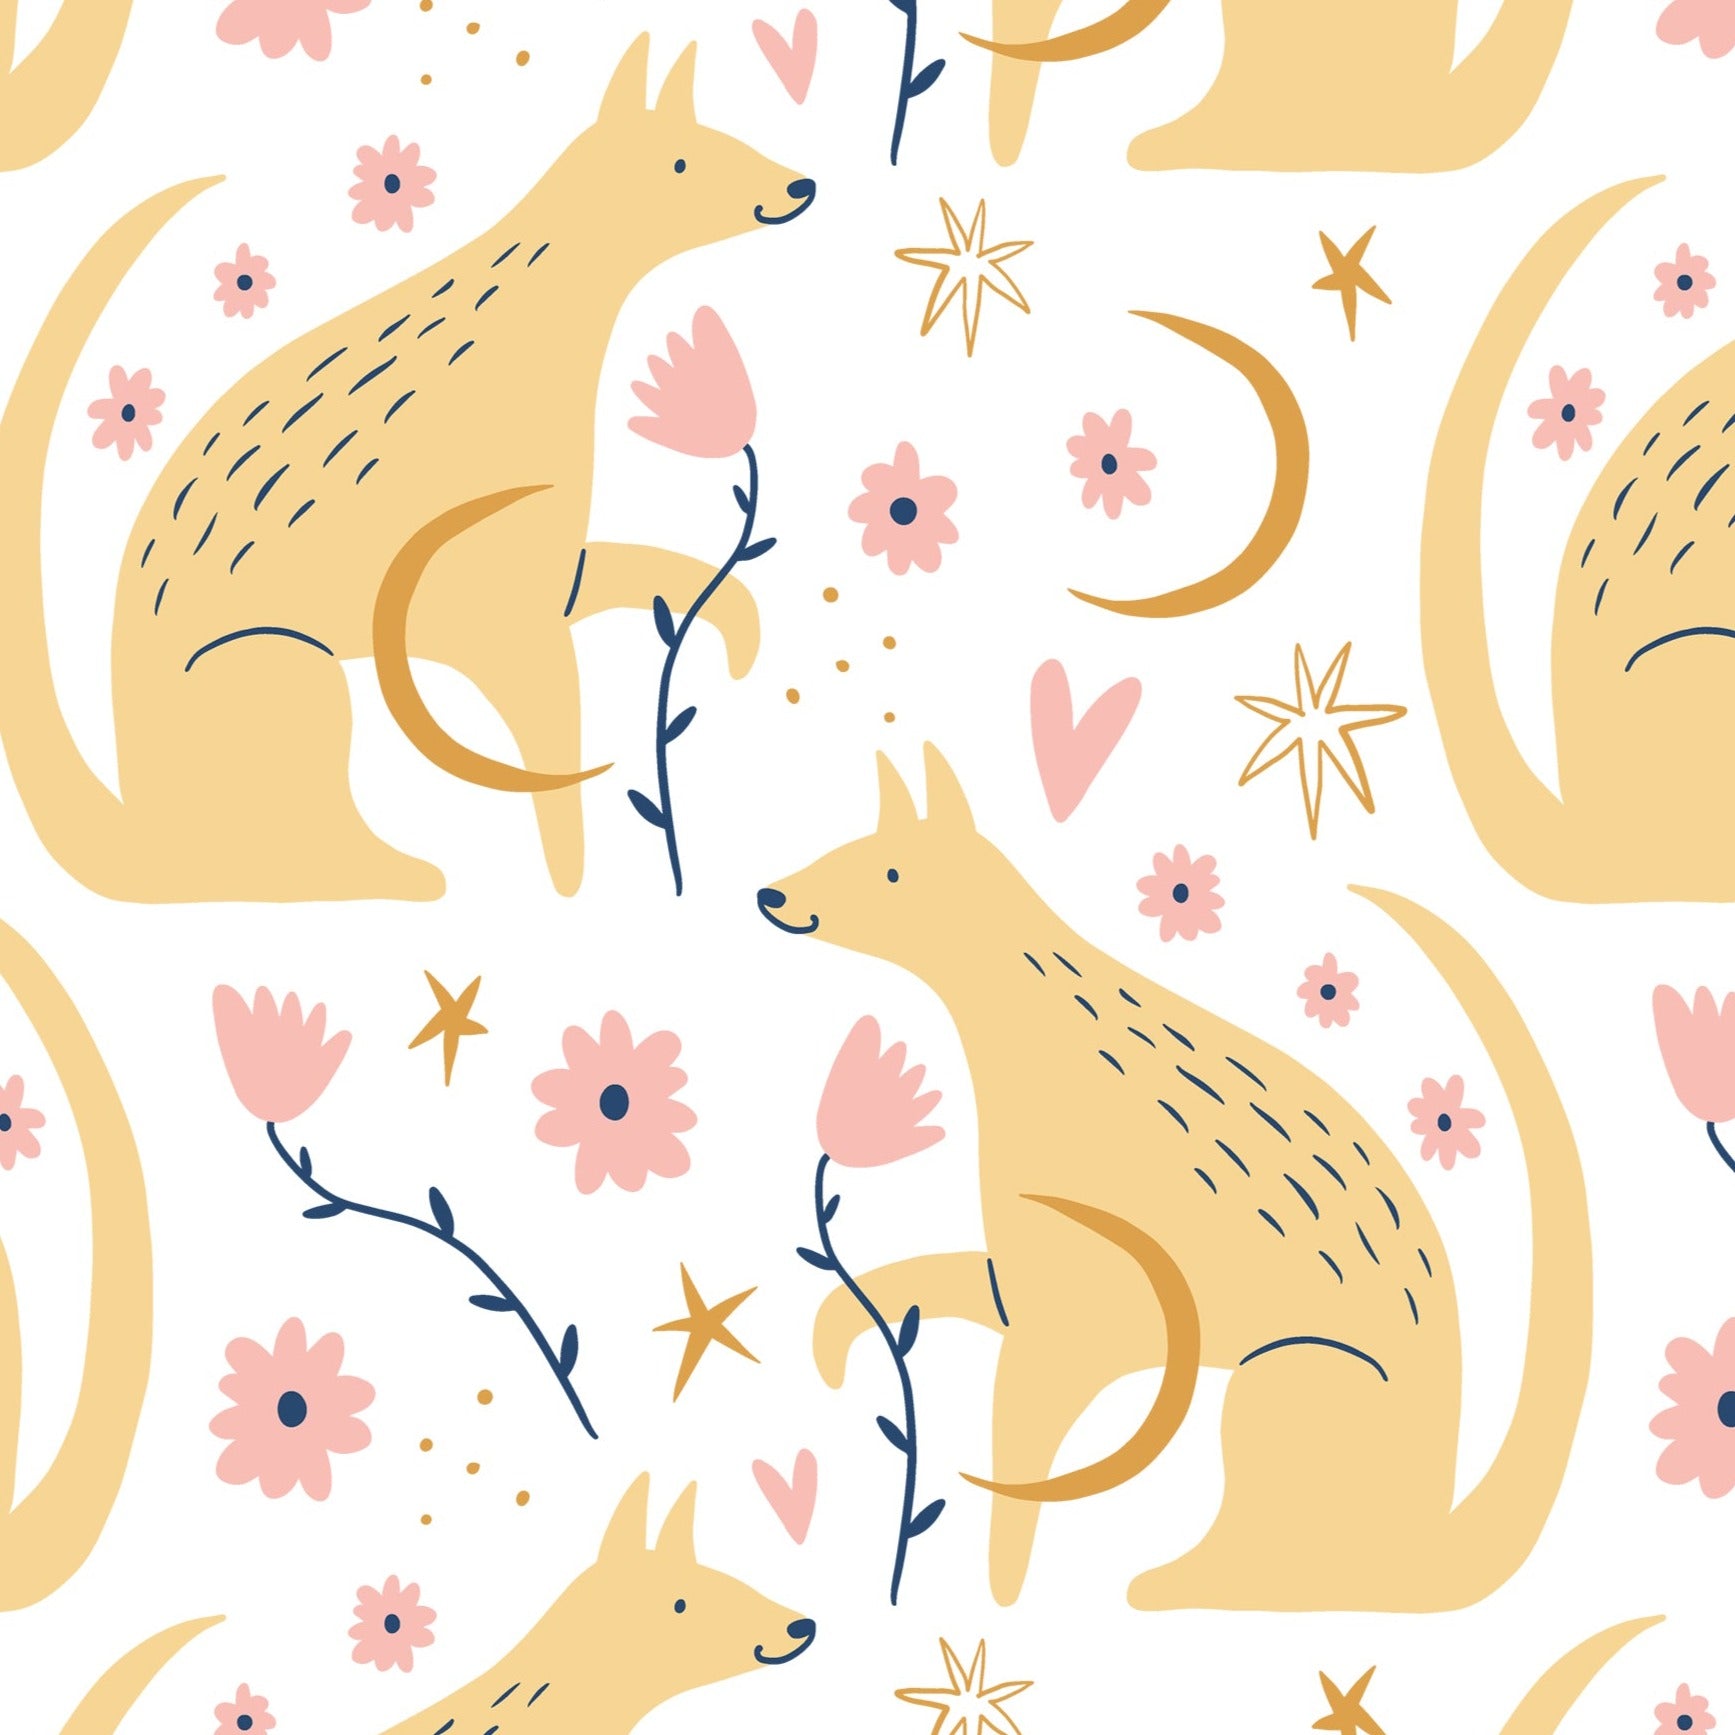 Enchanting wallpaper pattern from 'Dog Wallpaper 41' featuring golden dogs in serene poses surrounded by whimsical celestial motifs, pink flowers, and delicate branches on a light background. This design is perfect for adding a touch of magic and tranquility to any room, especially suitable for children's rooms or peaceful retreats